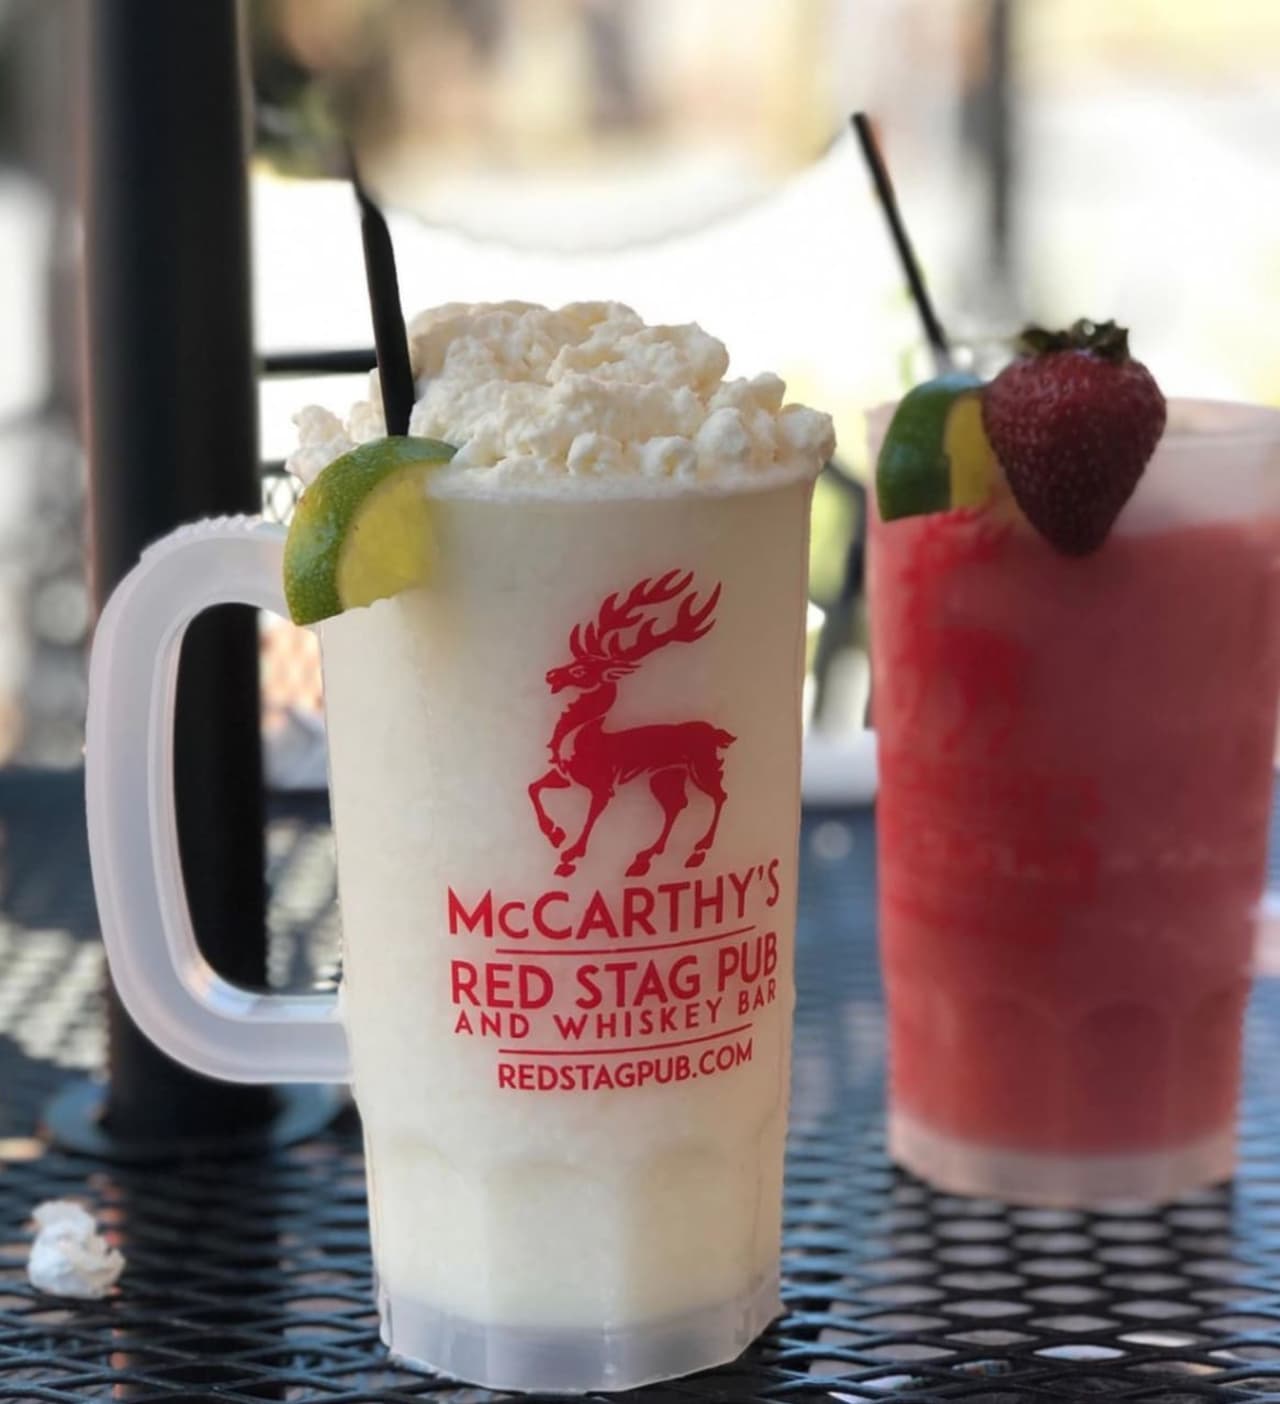 McCarthy’s Red Stag Pub and Whiskey Bar in Bethlehem